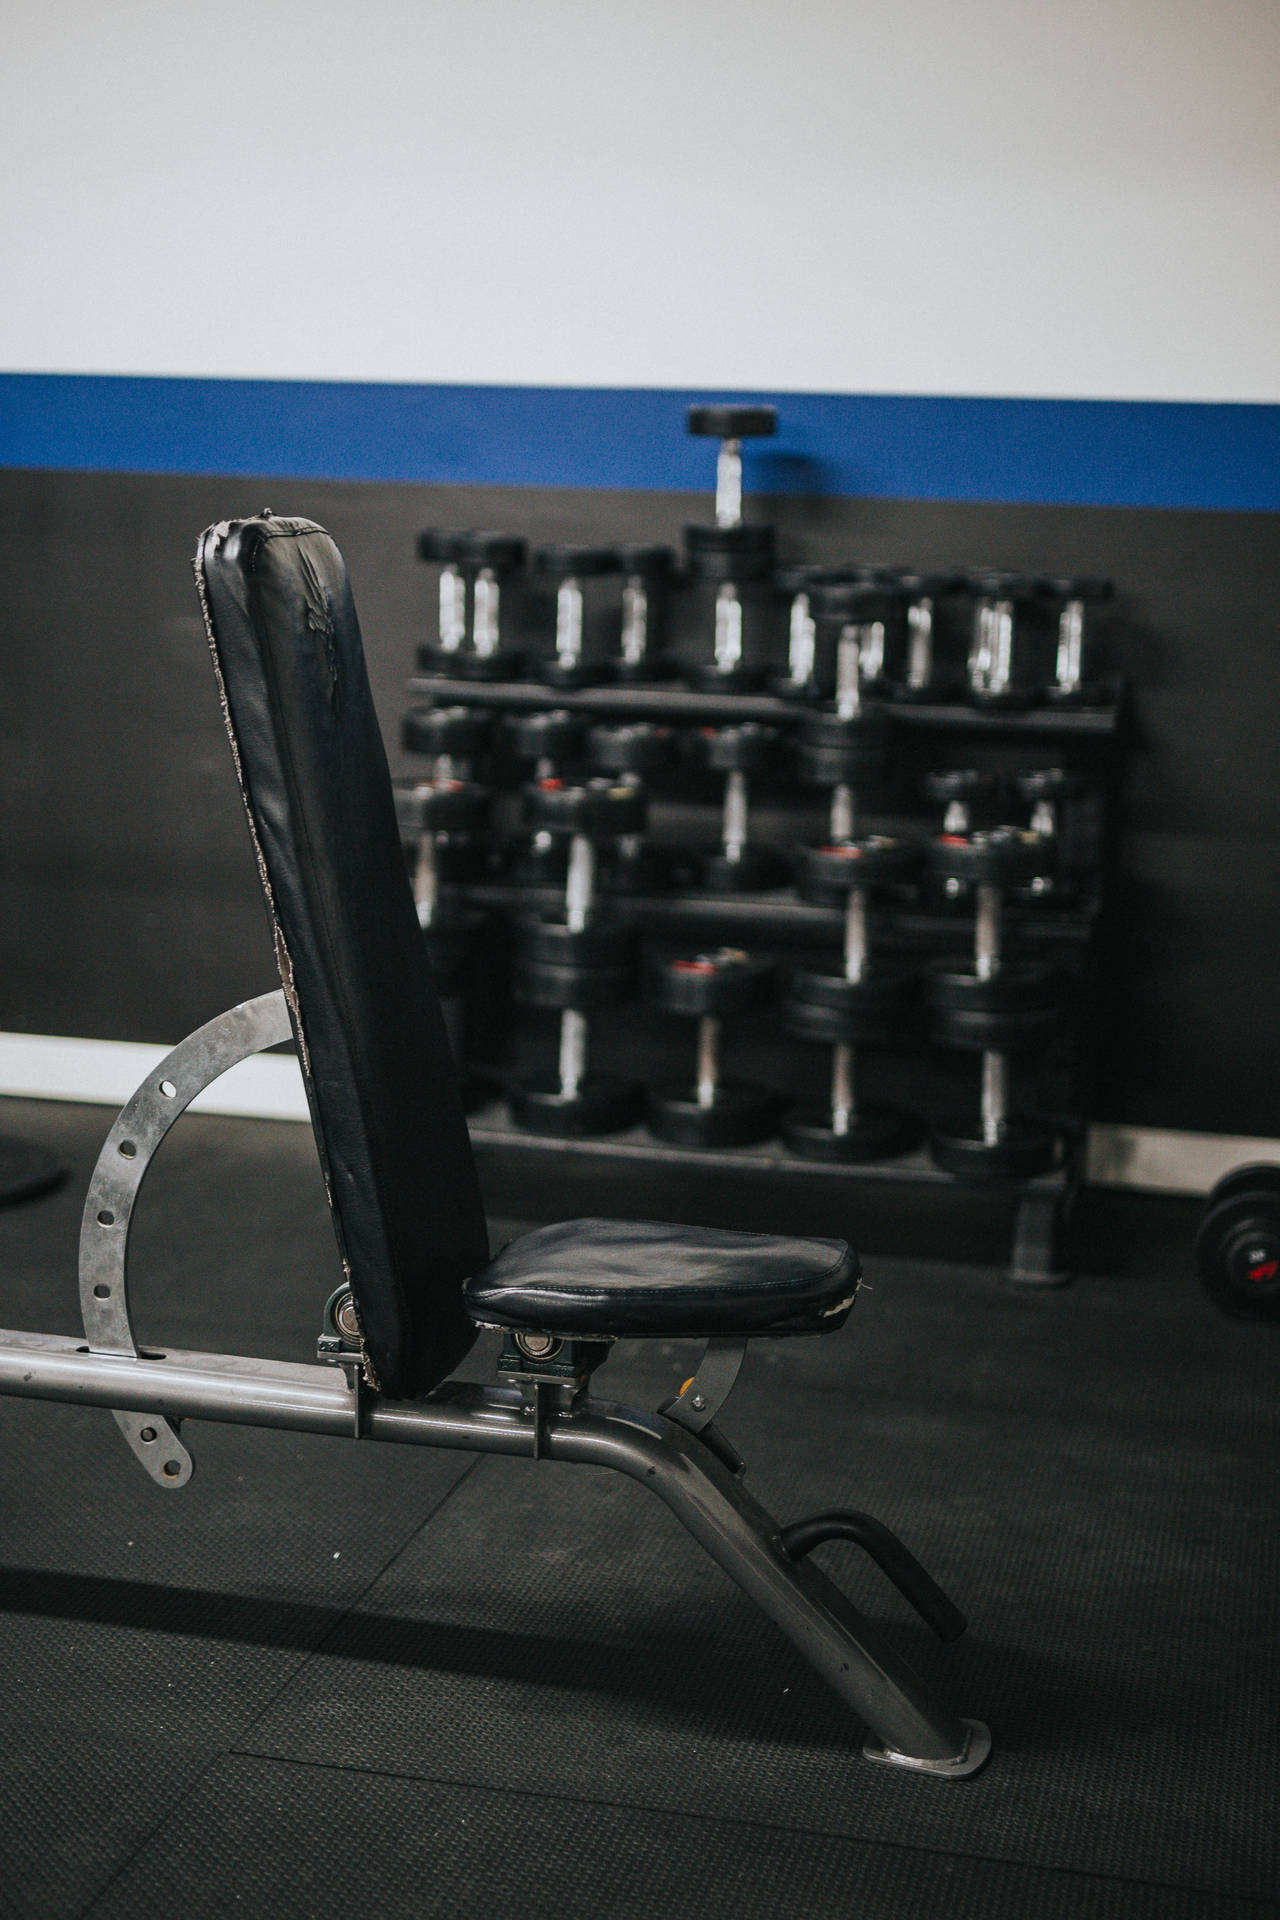 Weightlifting Equipment In Gym Background